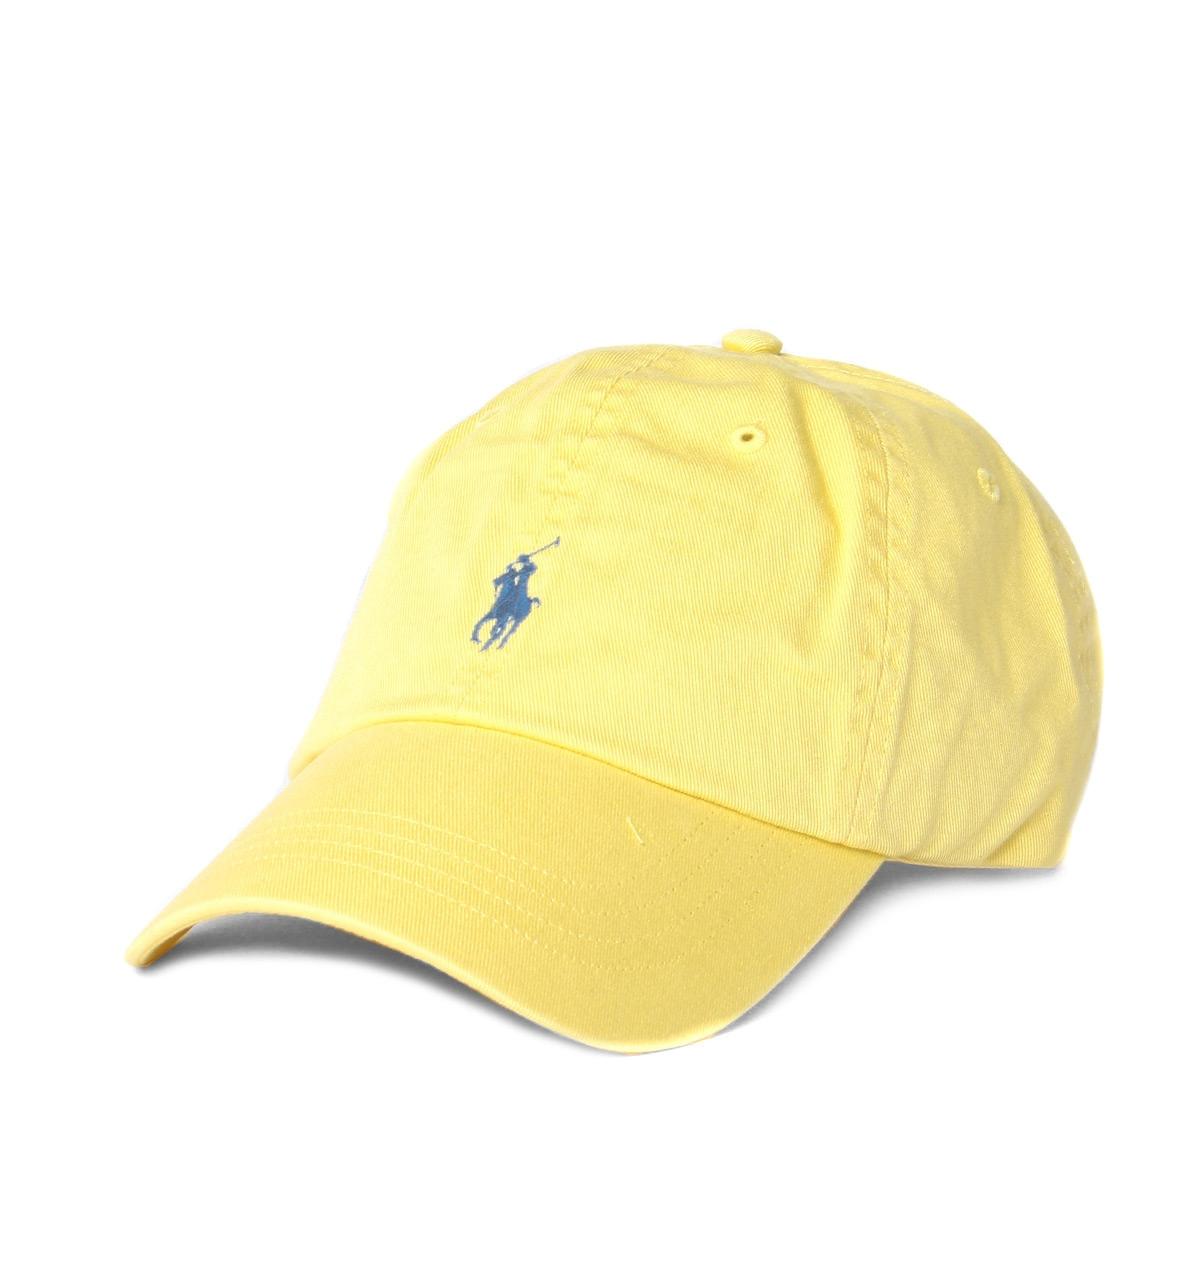 yellow polo hat